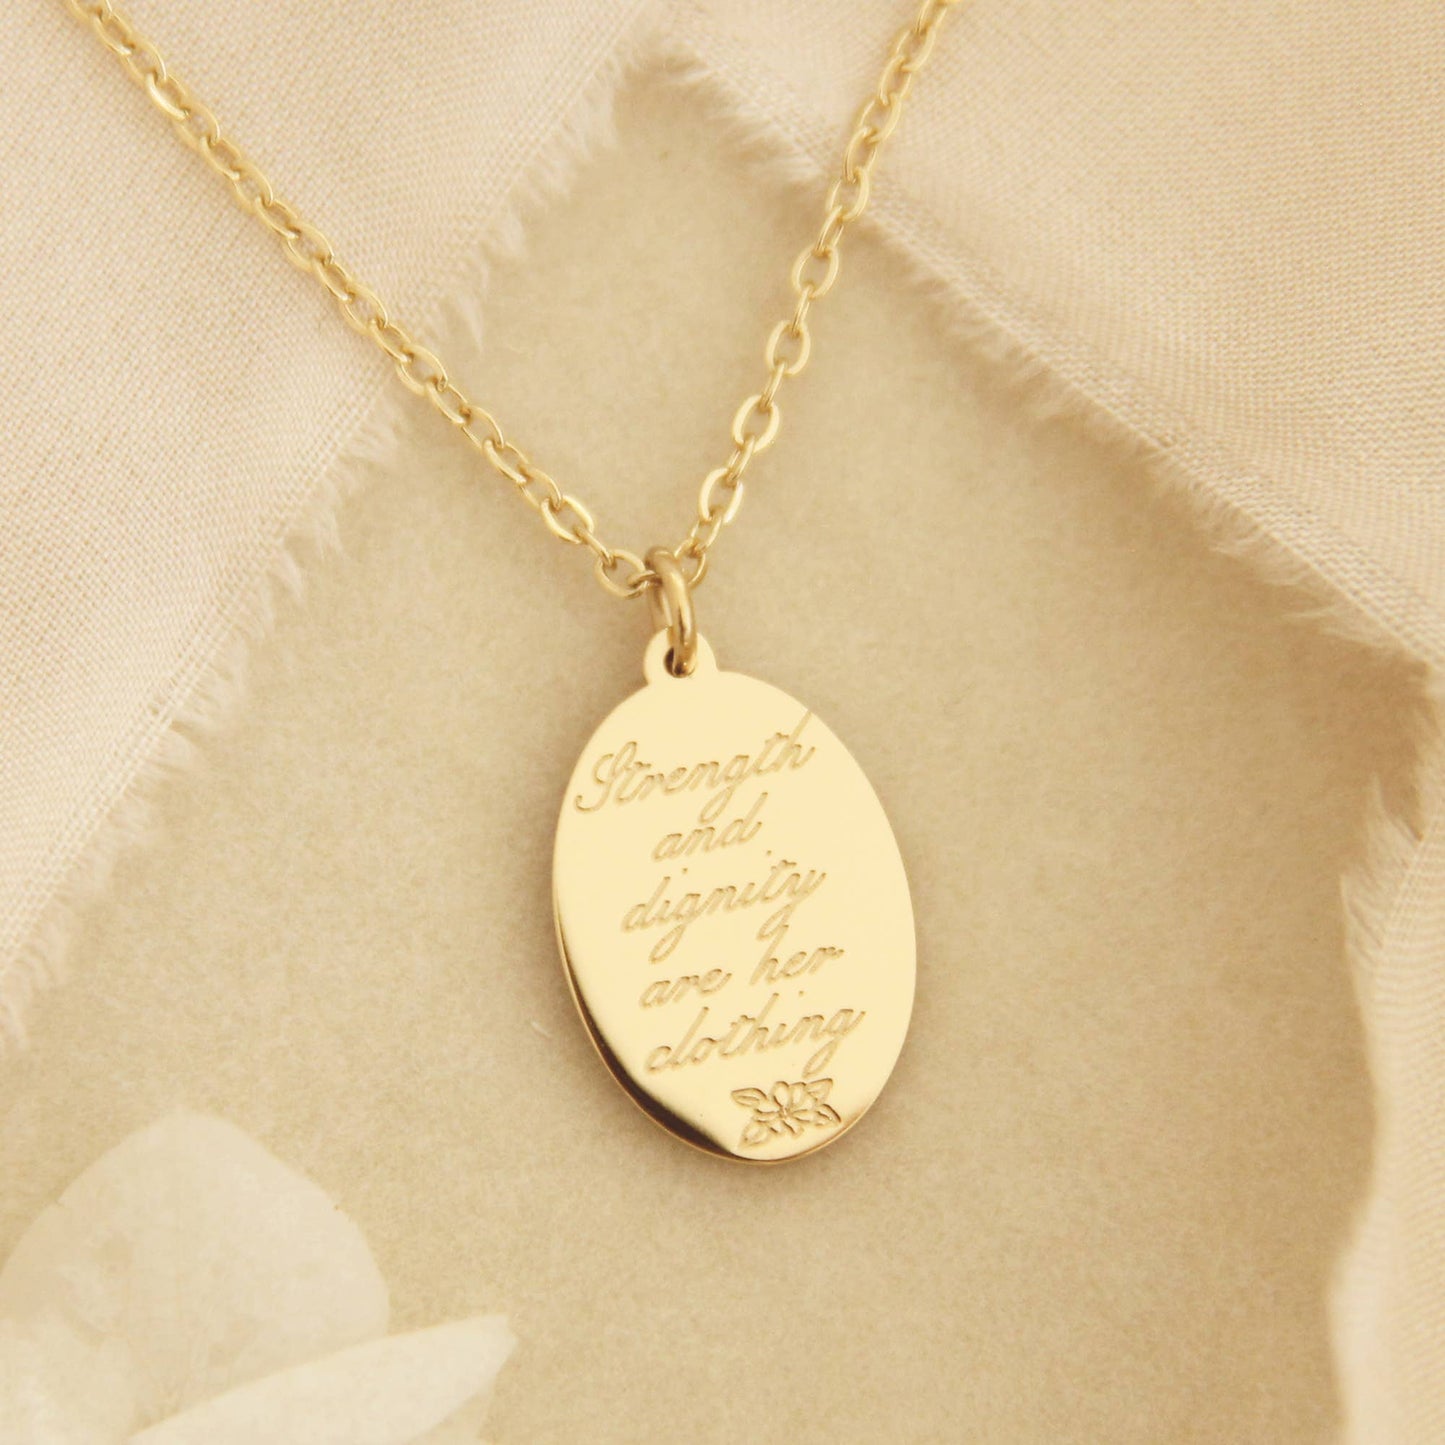 Proverbs 31:25 Necklace, Strength + Dignity are Her Clothing